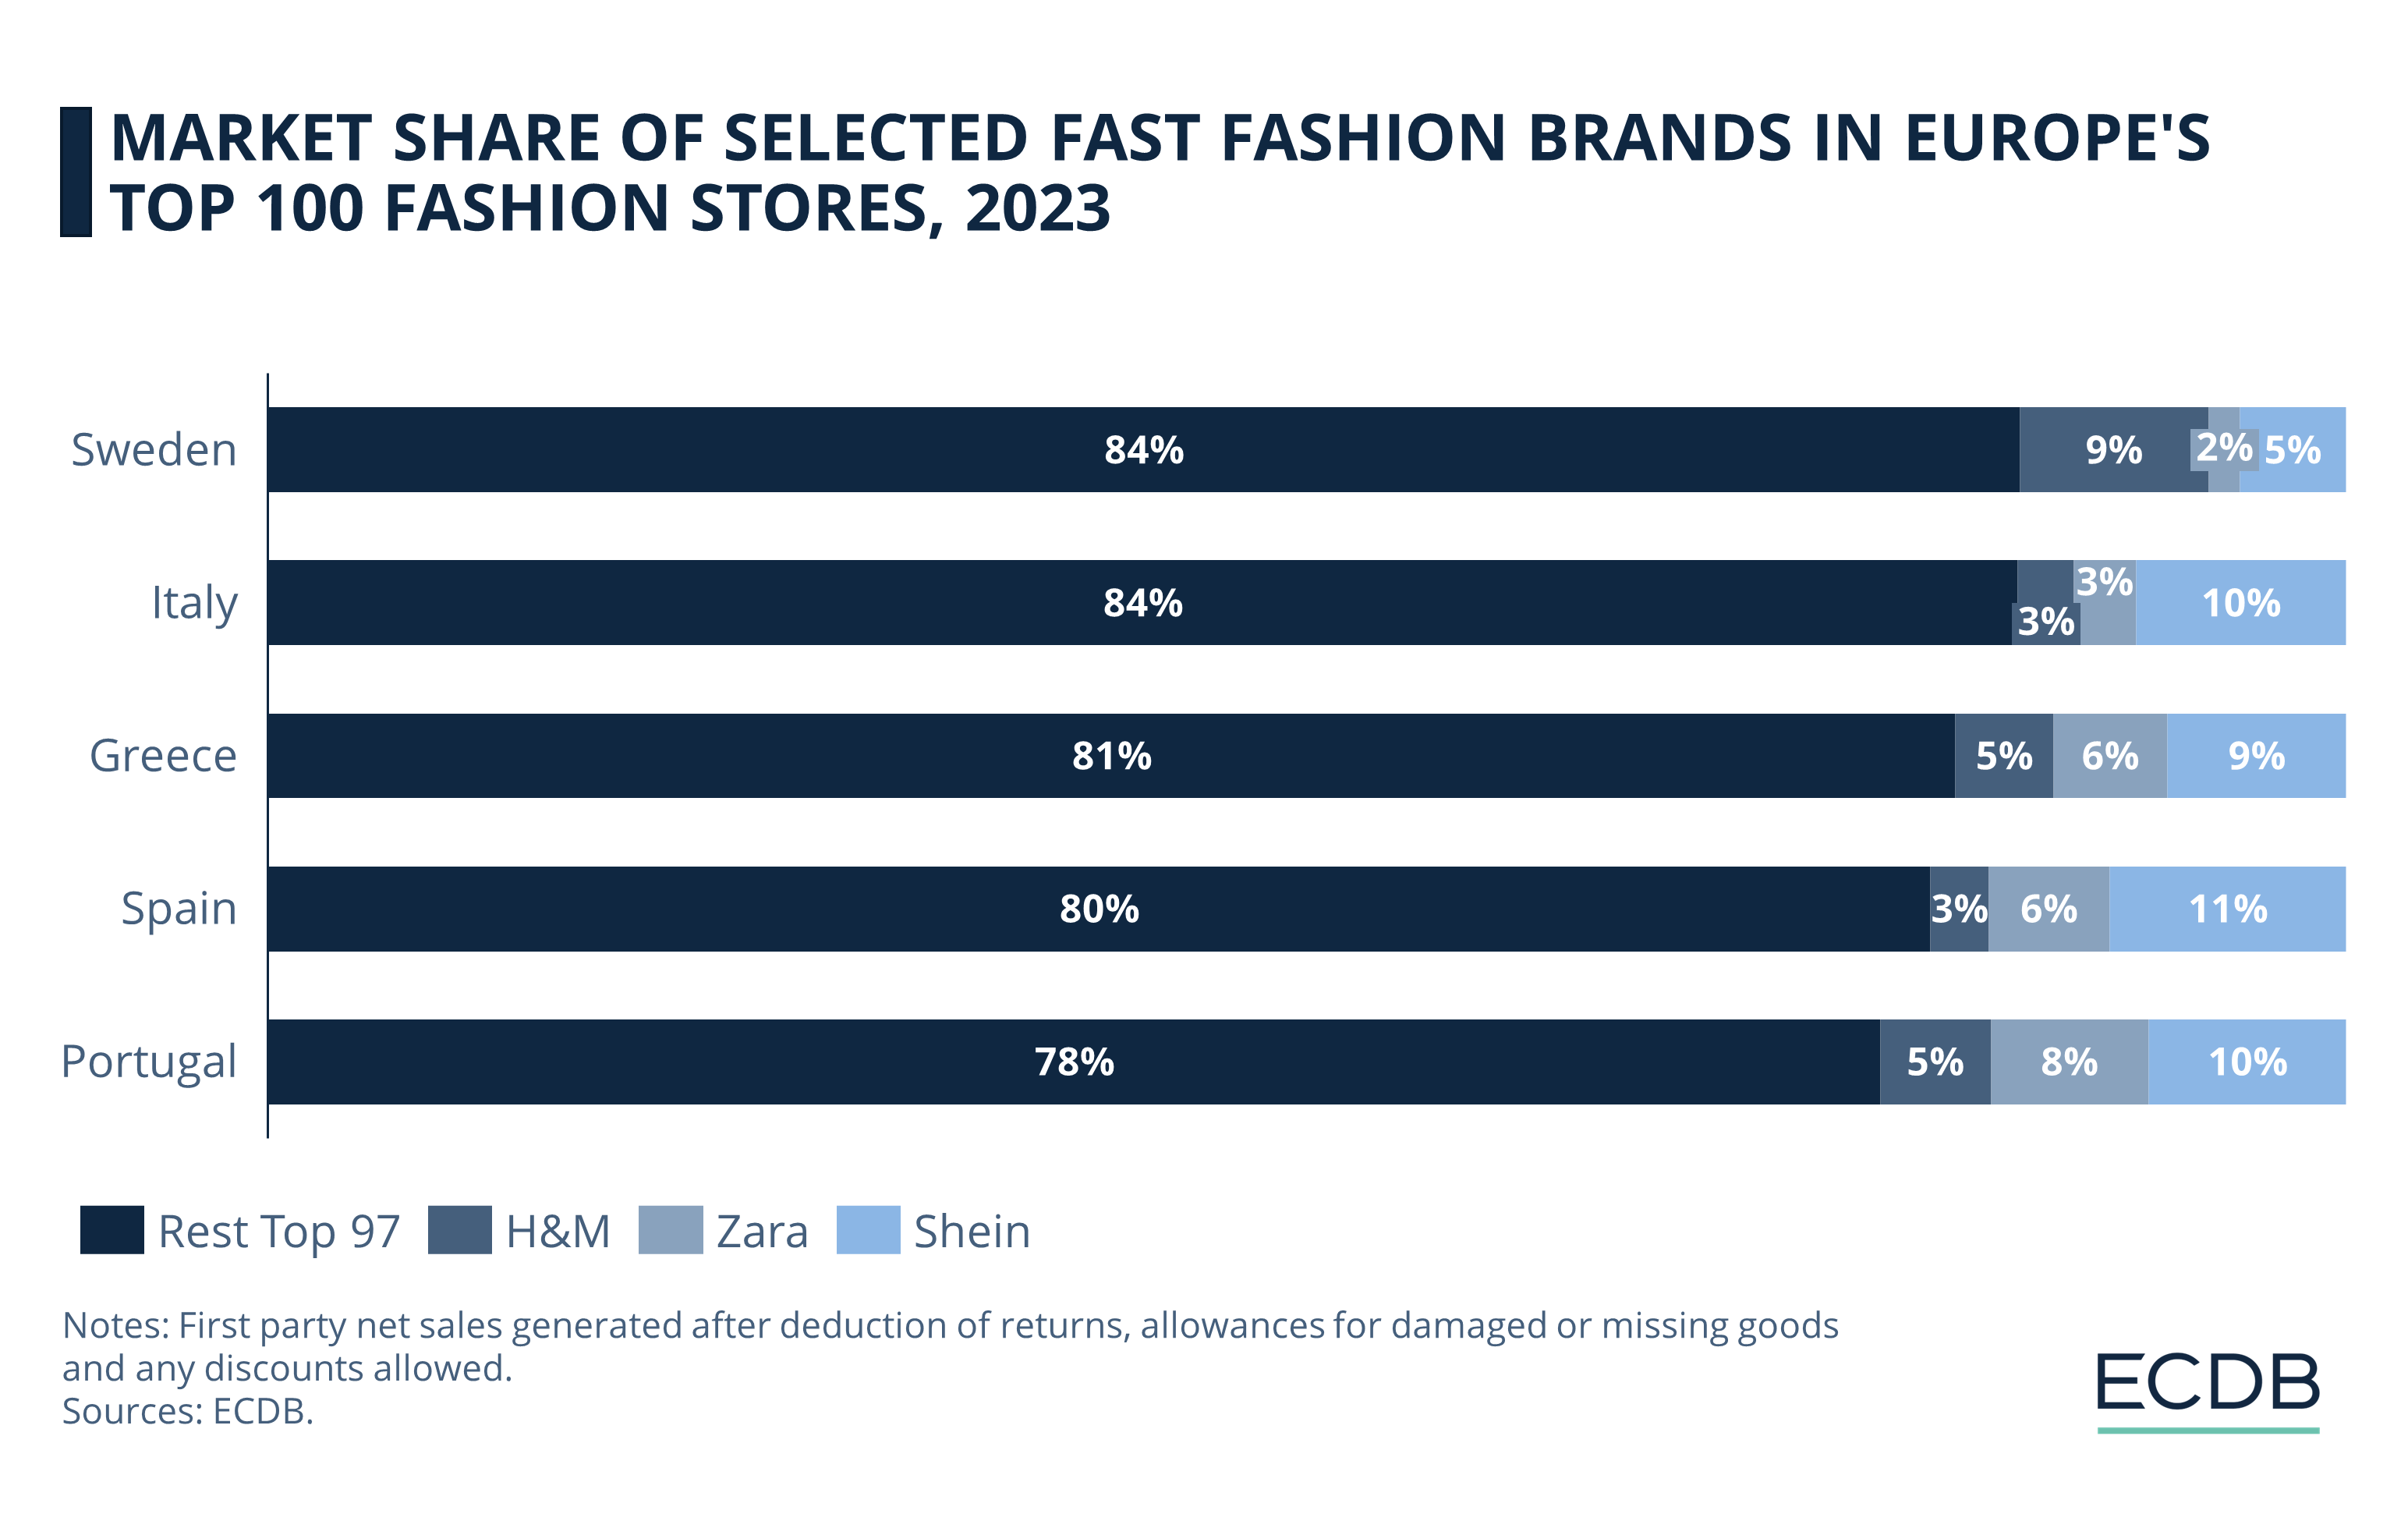 Market Share of Selected Fast Fashion Brands in Europe's Top 100 Fashion Stores, 2023